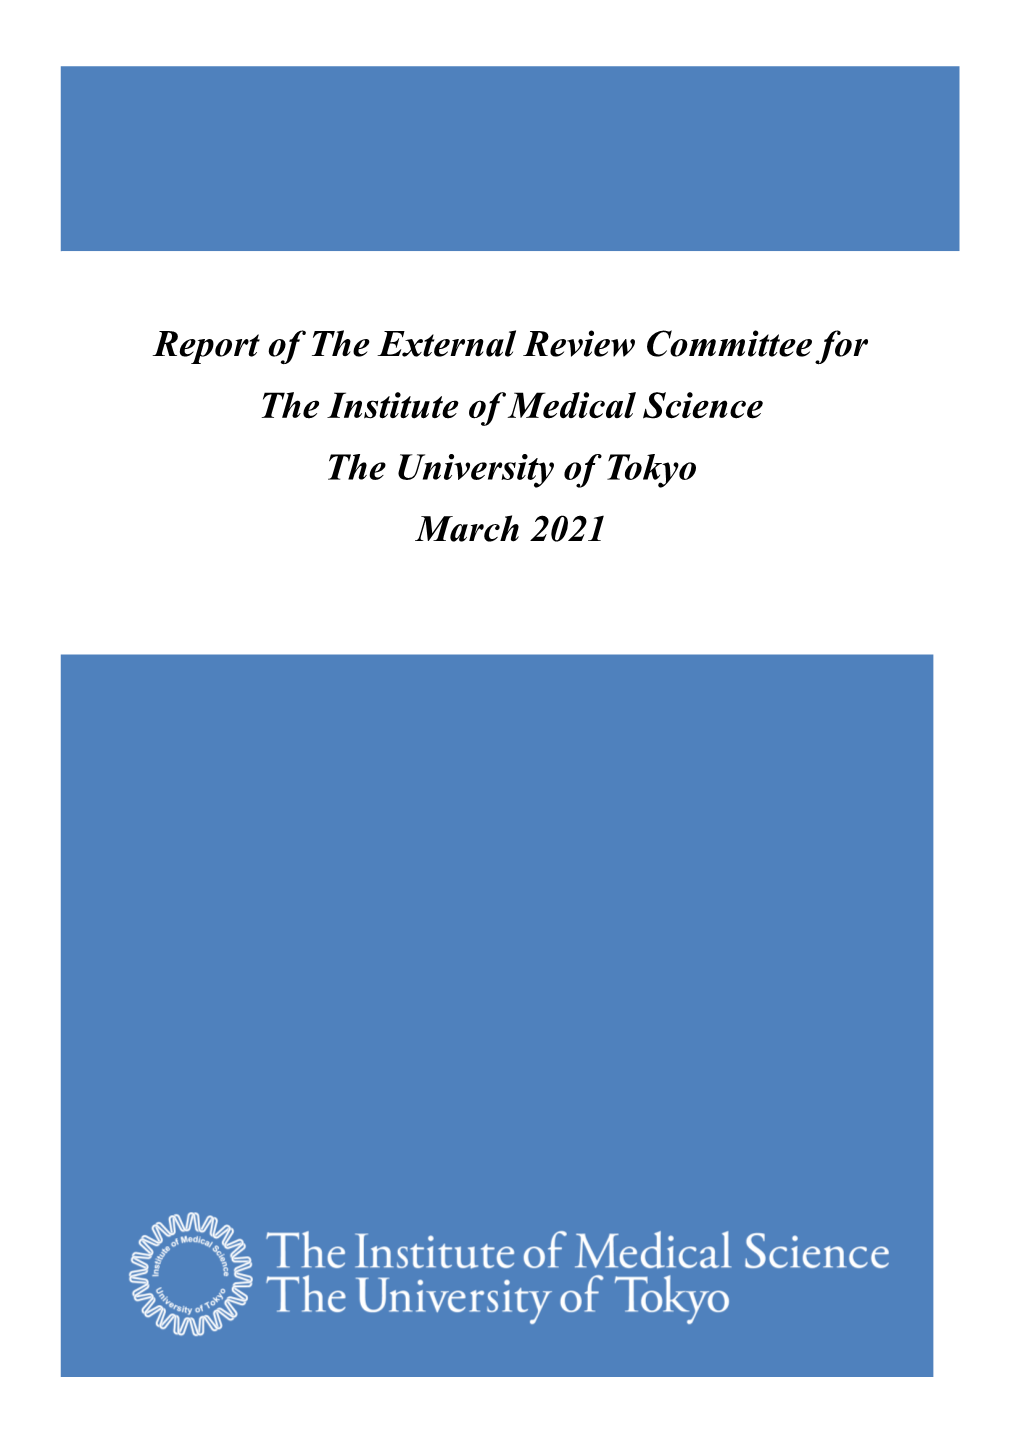 Report of the External Review Committee for the Institute of Medical Science the University of Tokyo March 2021